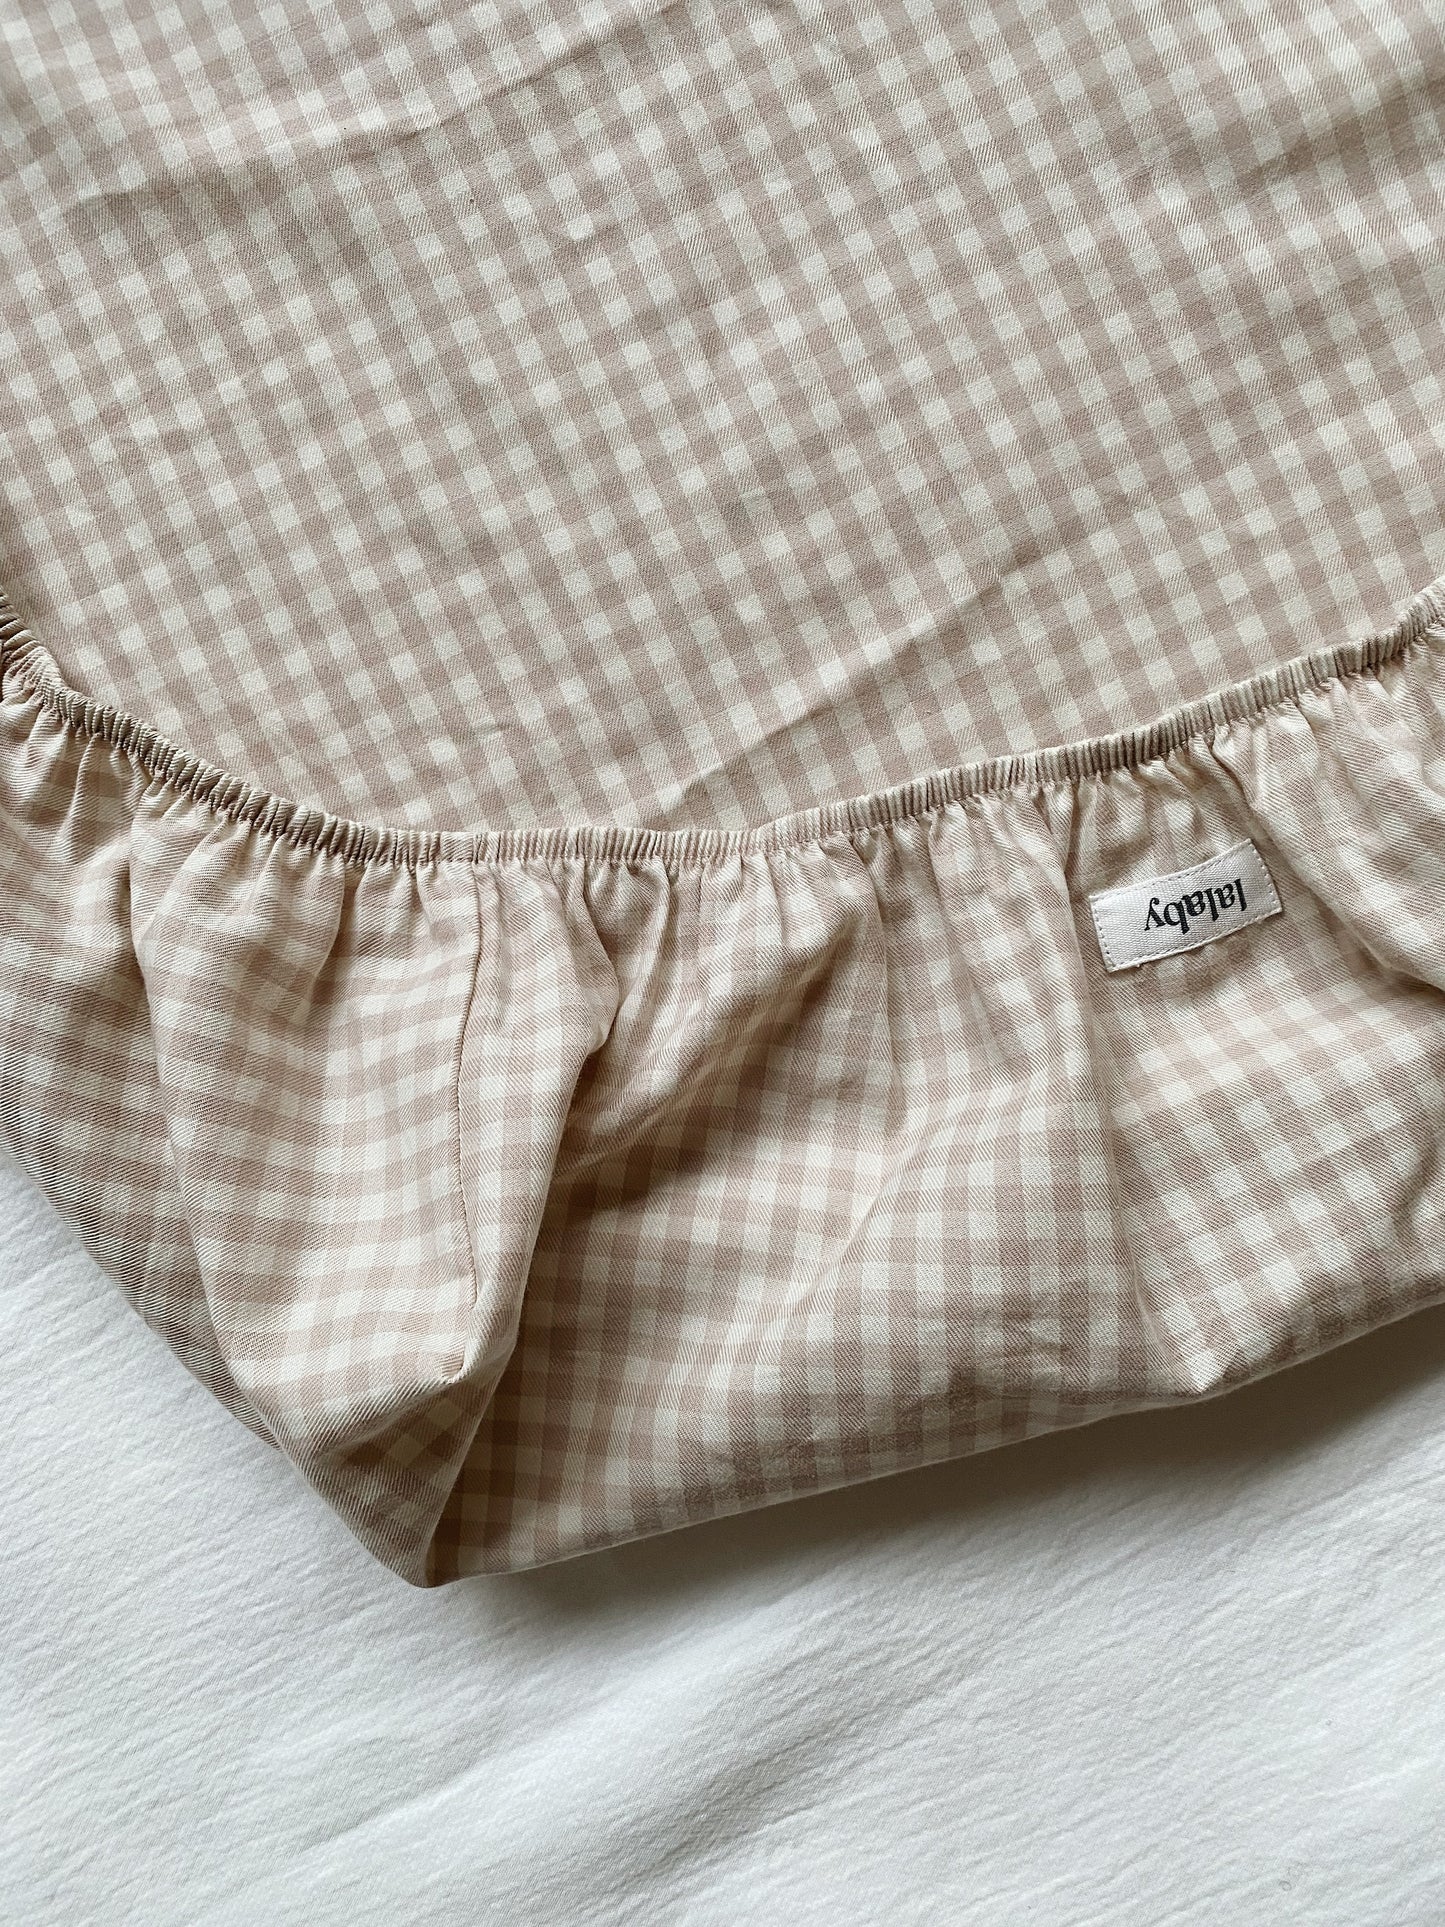 Lalaby - Changing mat cover - Beige Gingham